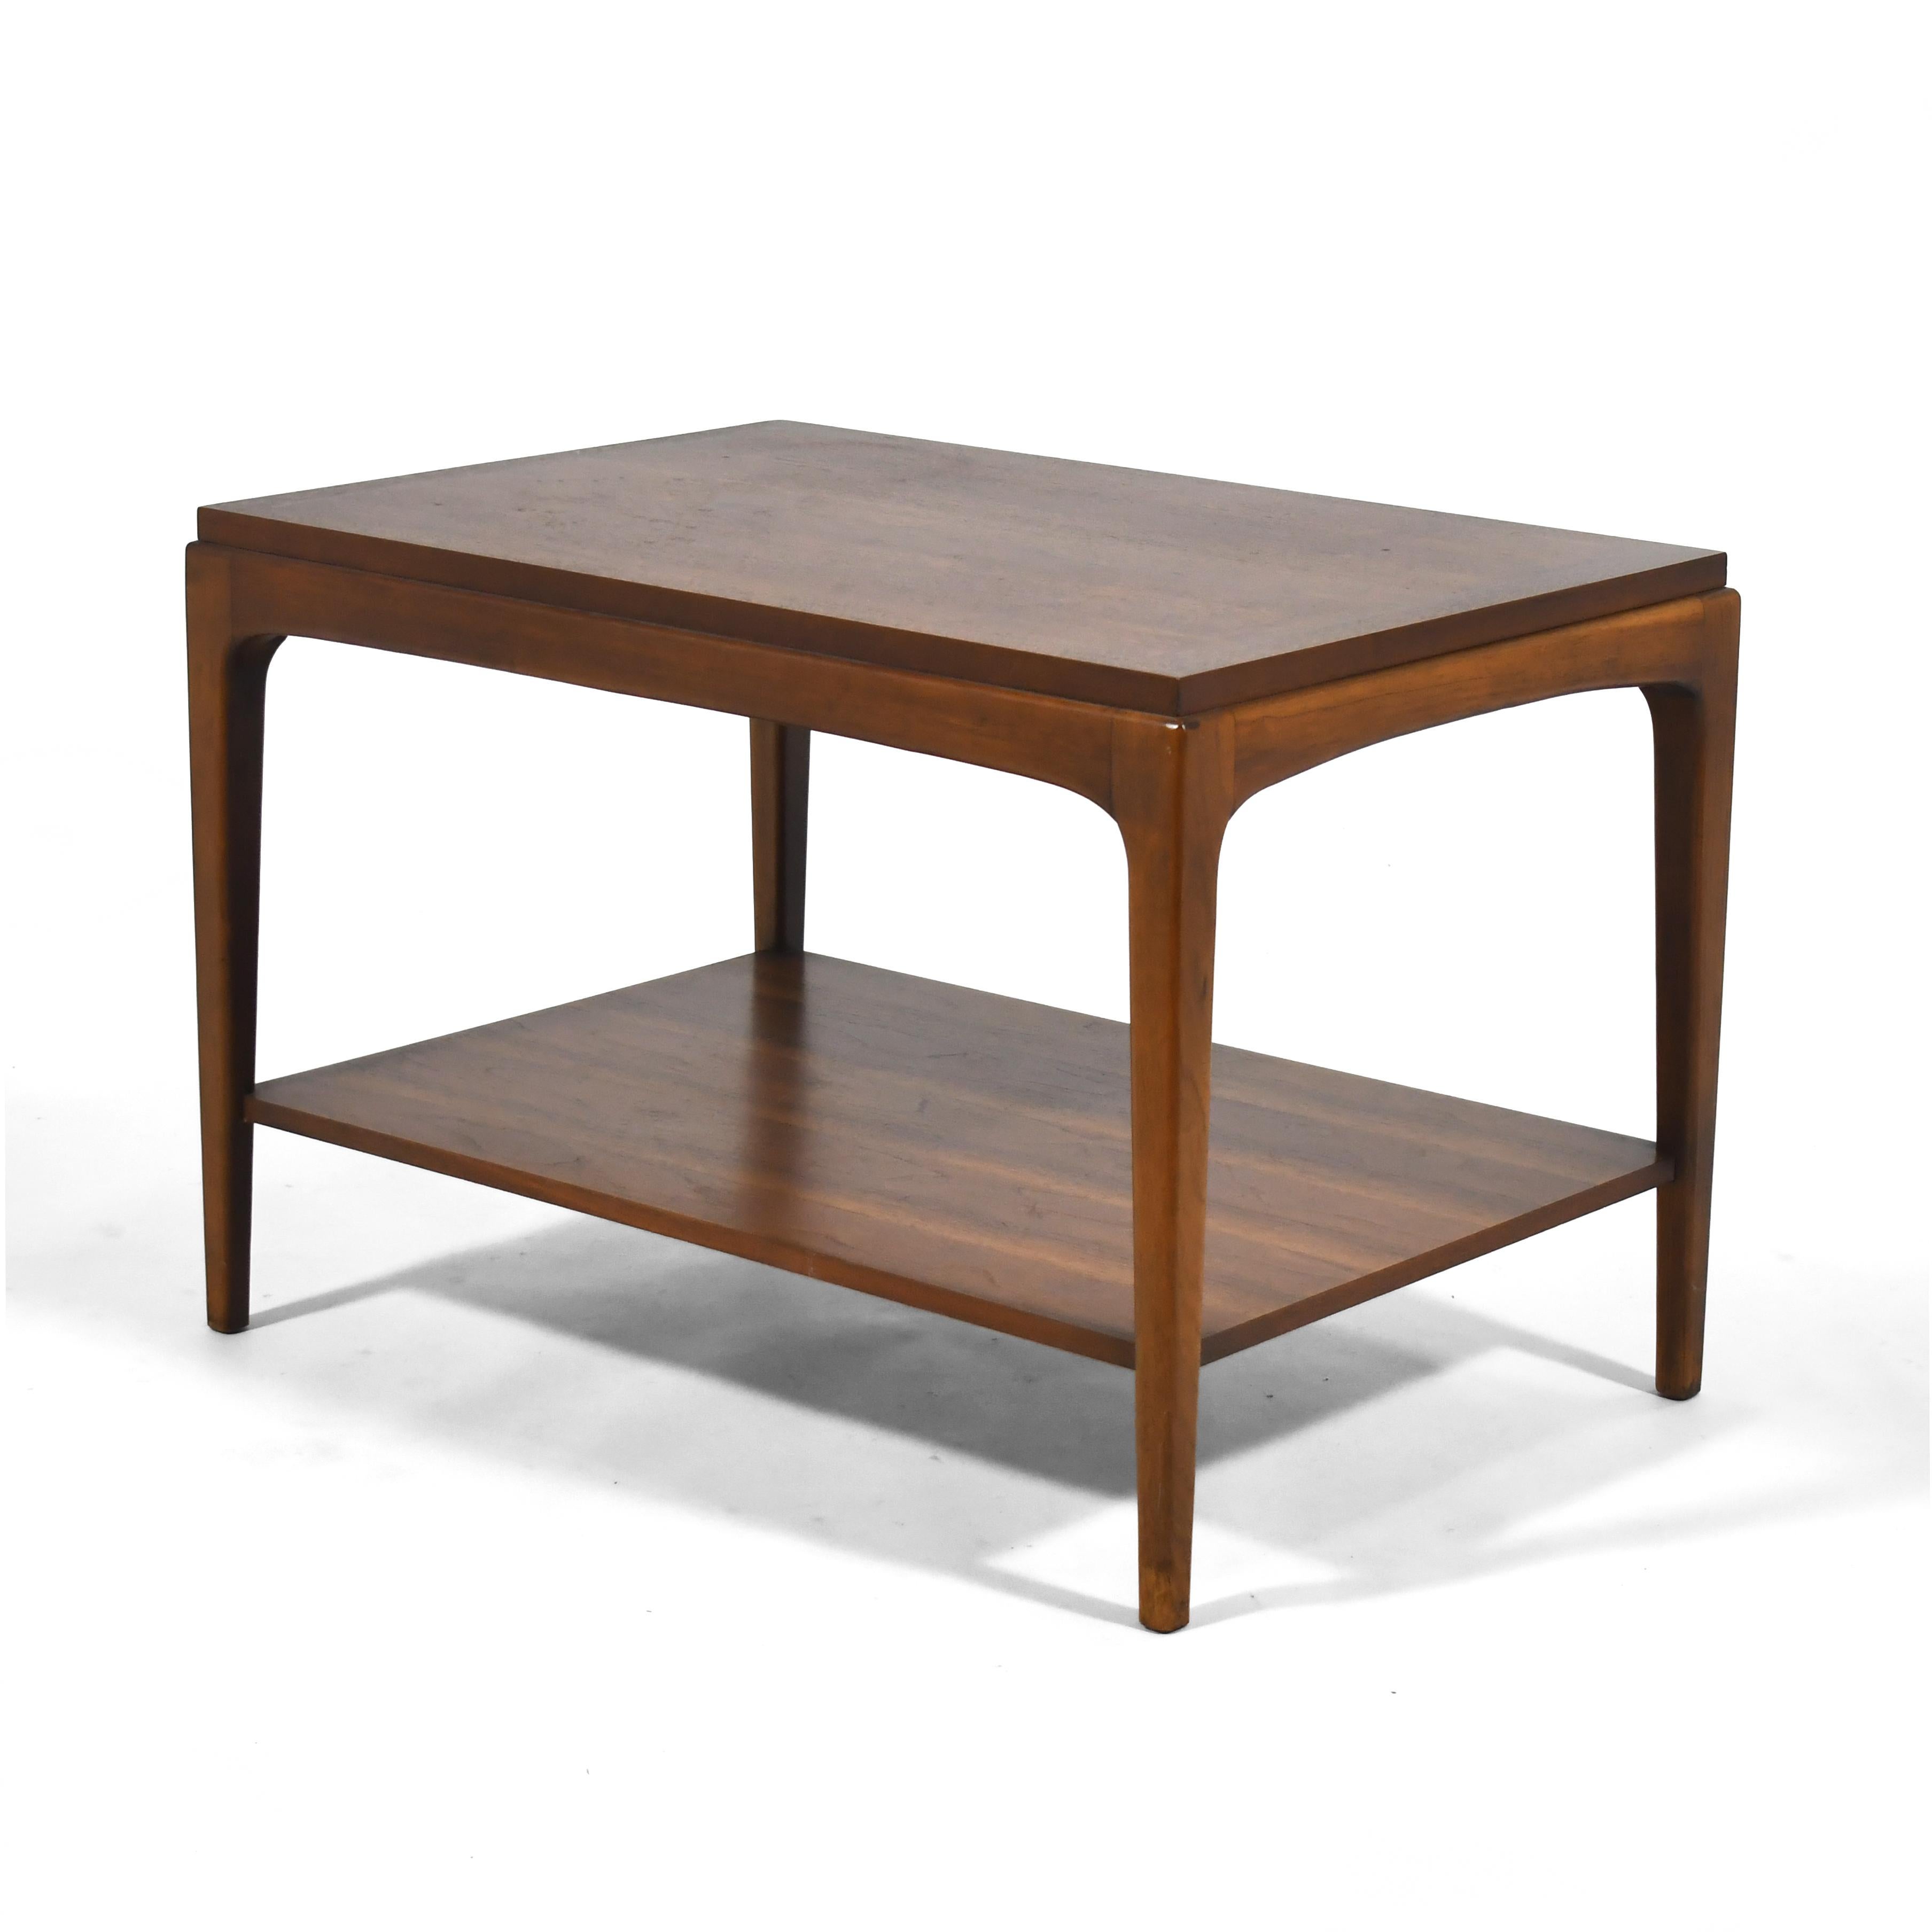 A handsome coffee table in walnut, this design from the Lane 